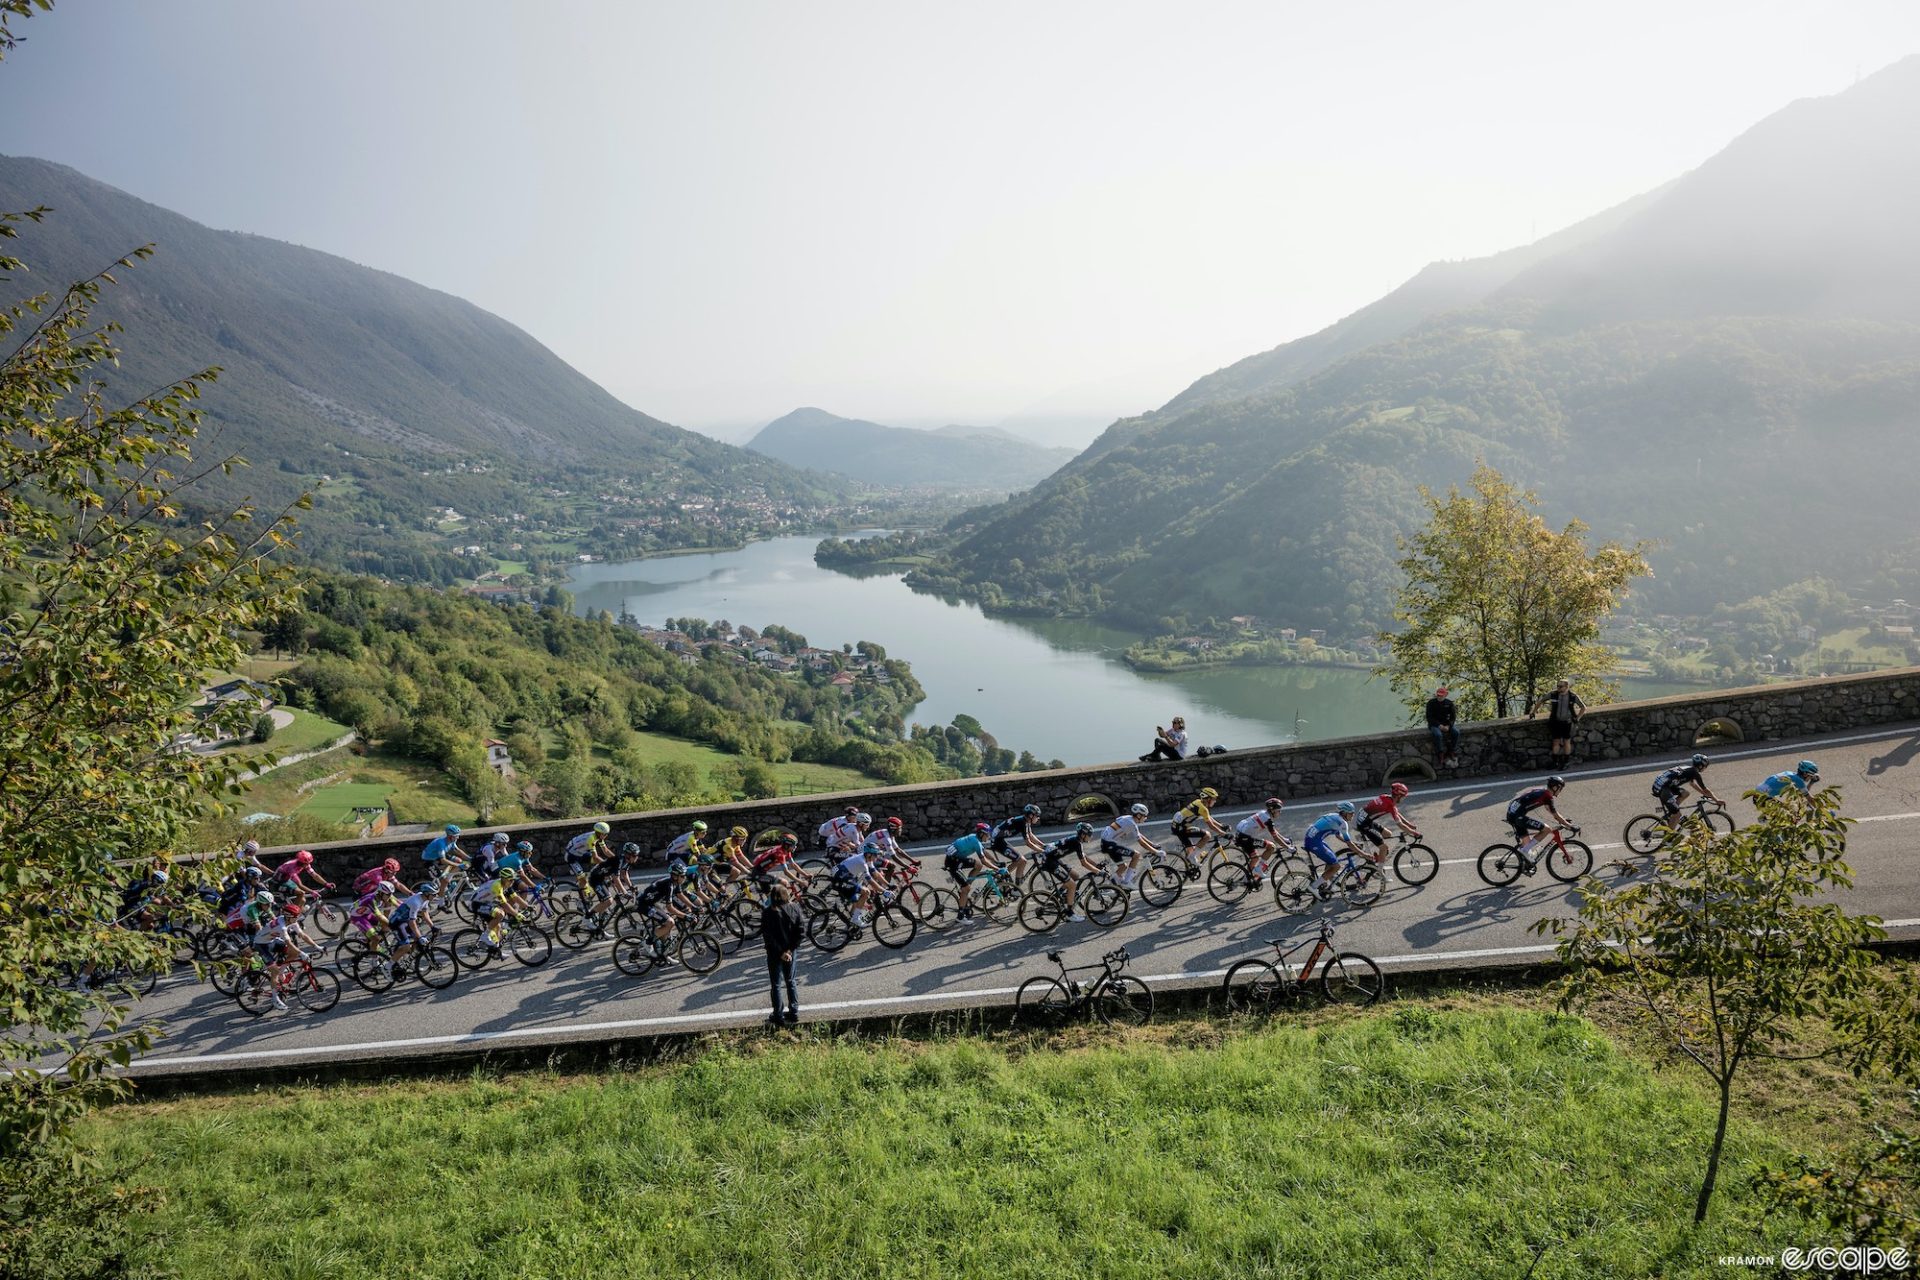 The peloton climbs a road past a lake, with steep, forested hills rising off the shore on either side.